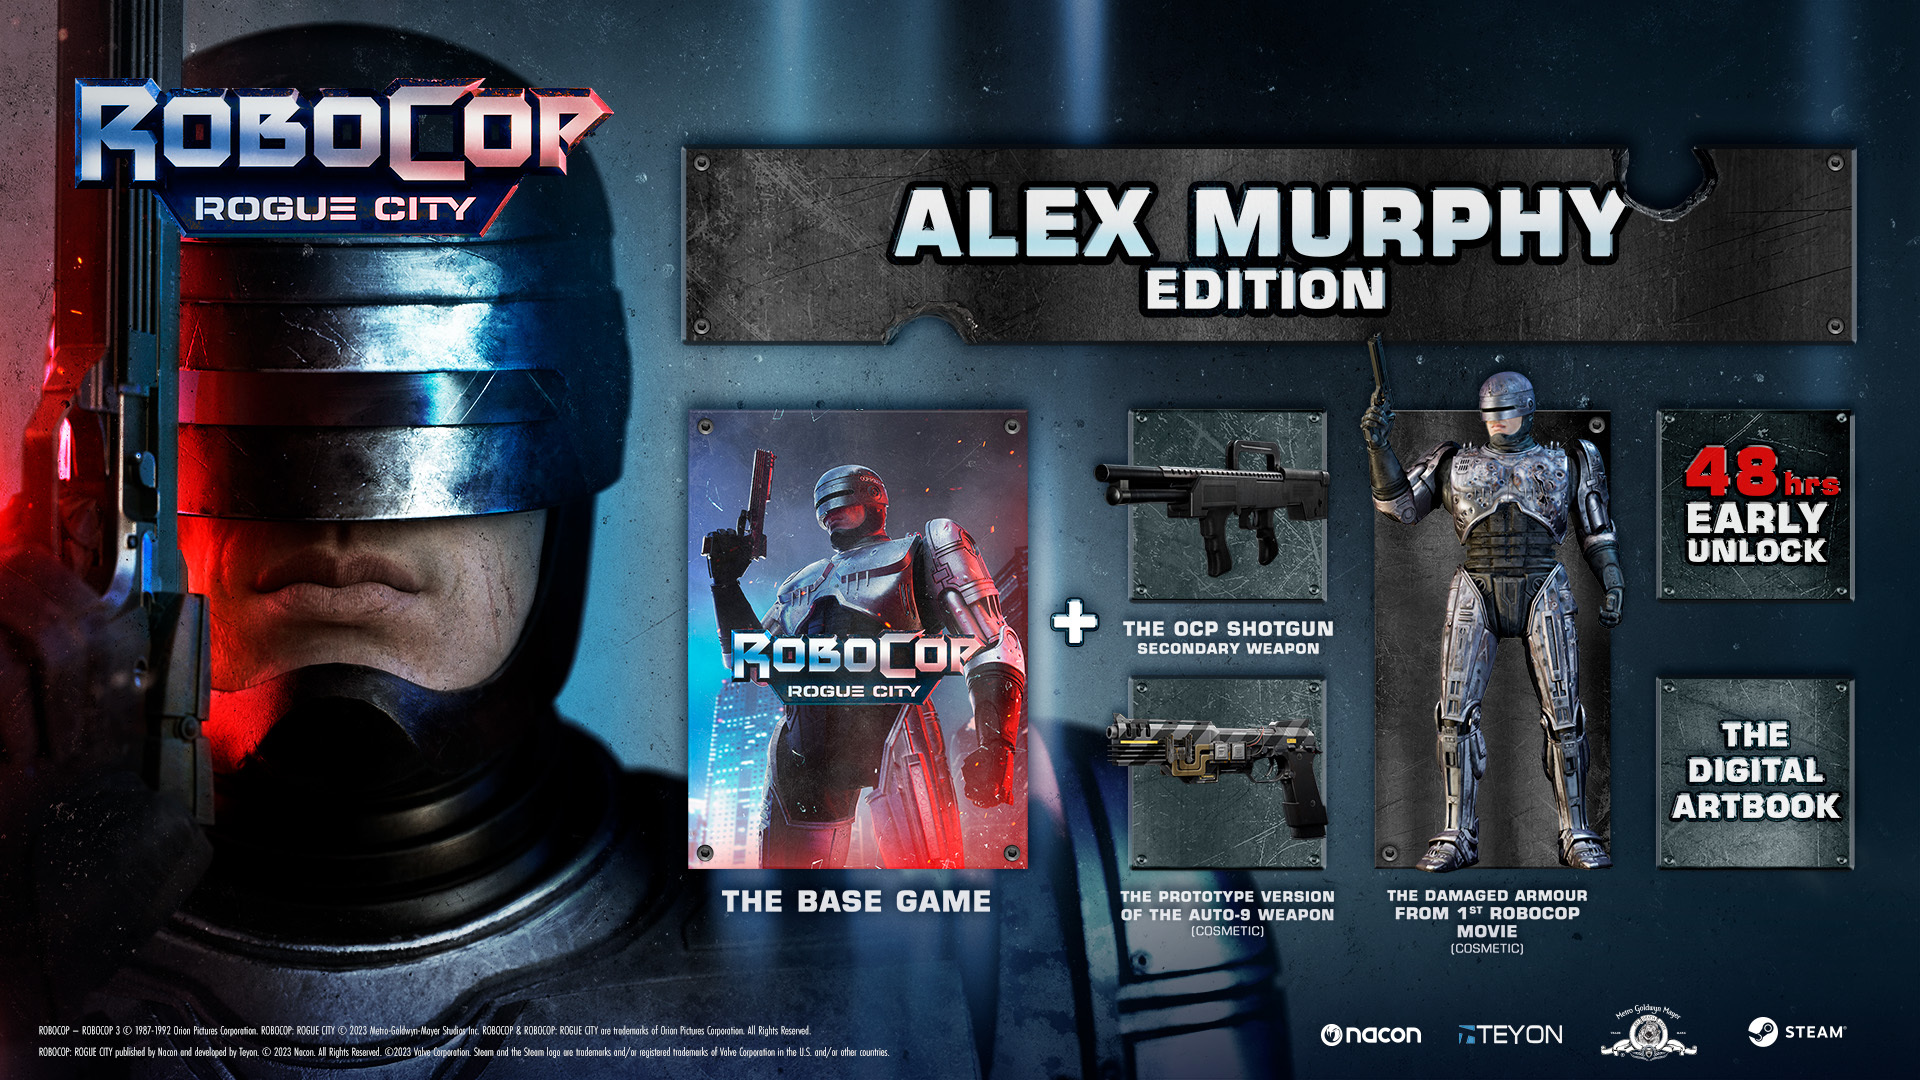 In the image, the Alex Murphy Edition set has exclusive items in addition to the game's art book.